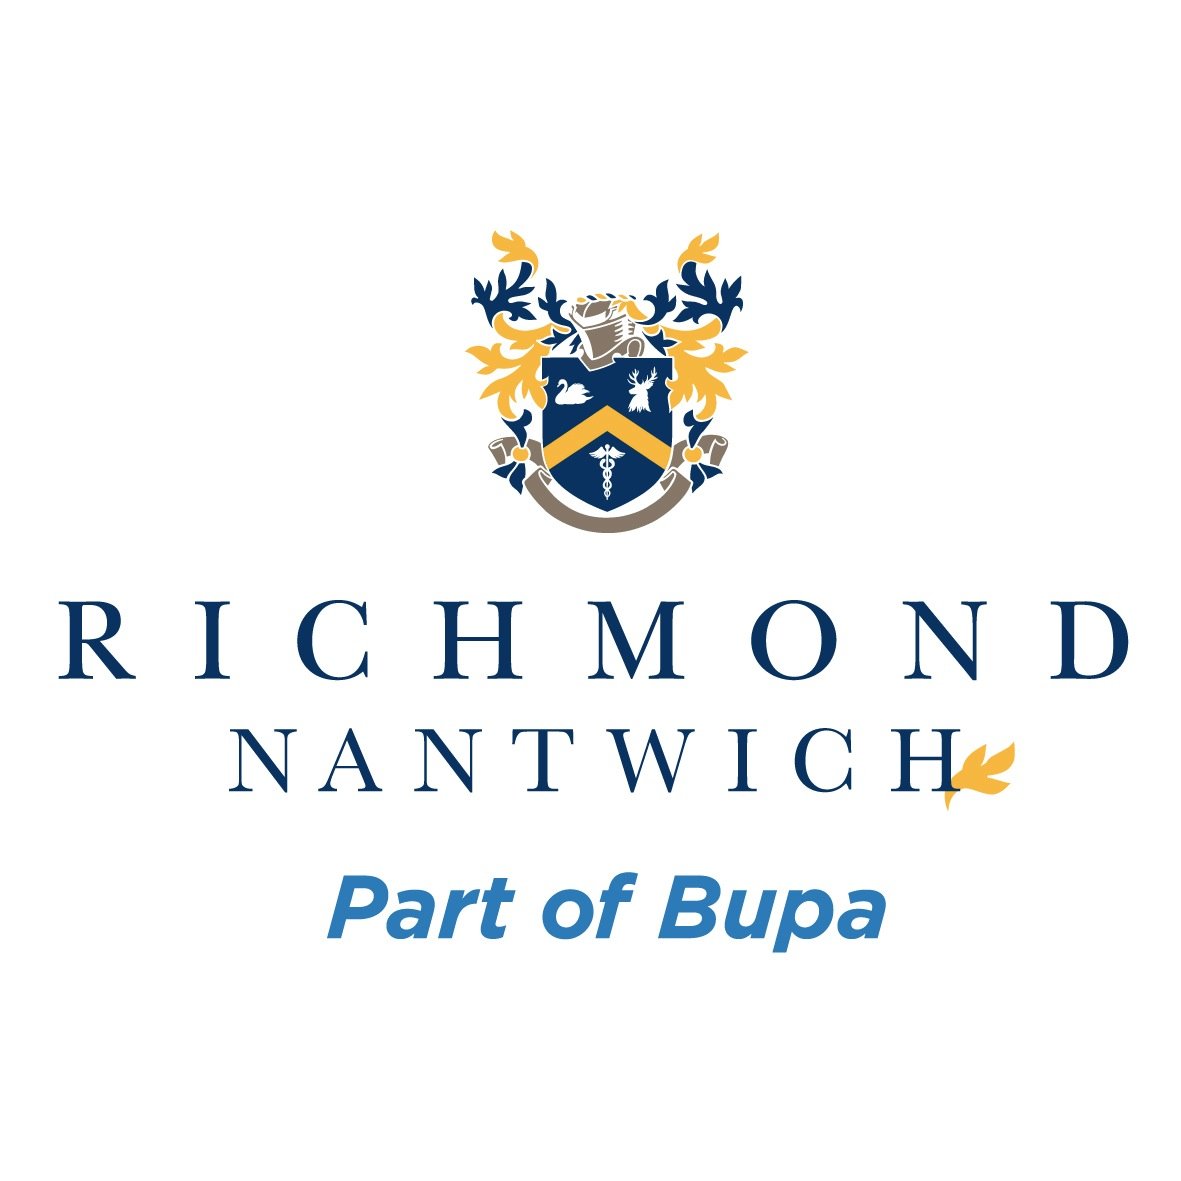 Richmond Villages Nantwich is an award-winning Retirement Village providing Independent and Assisted Living Apartments plus a 41 bedroom Residential Care Home